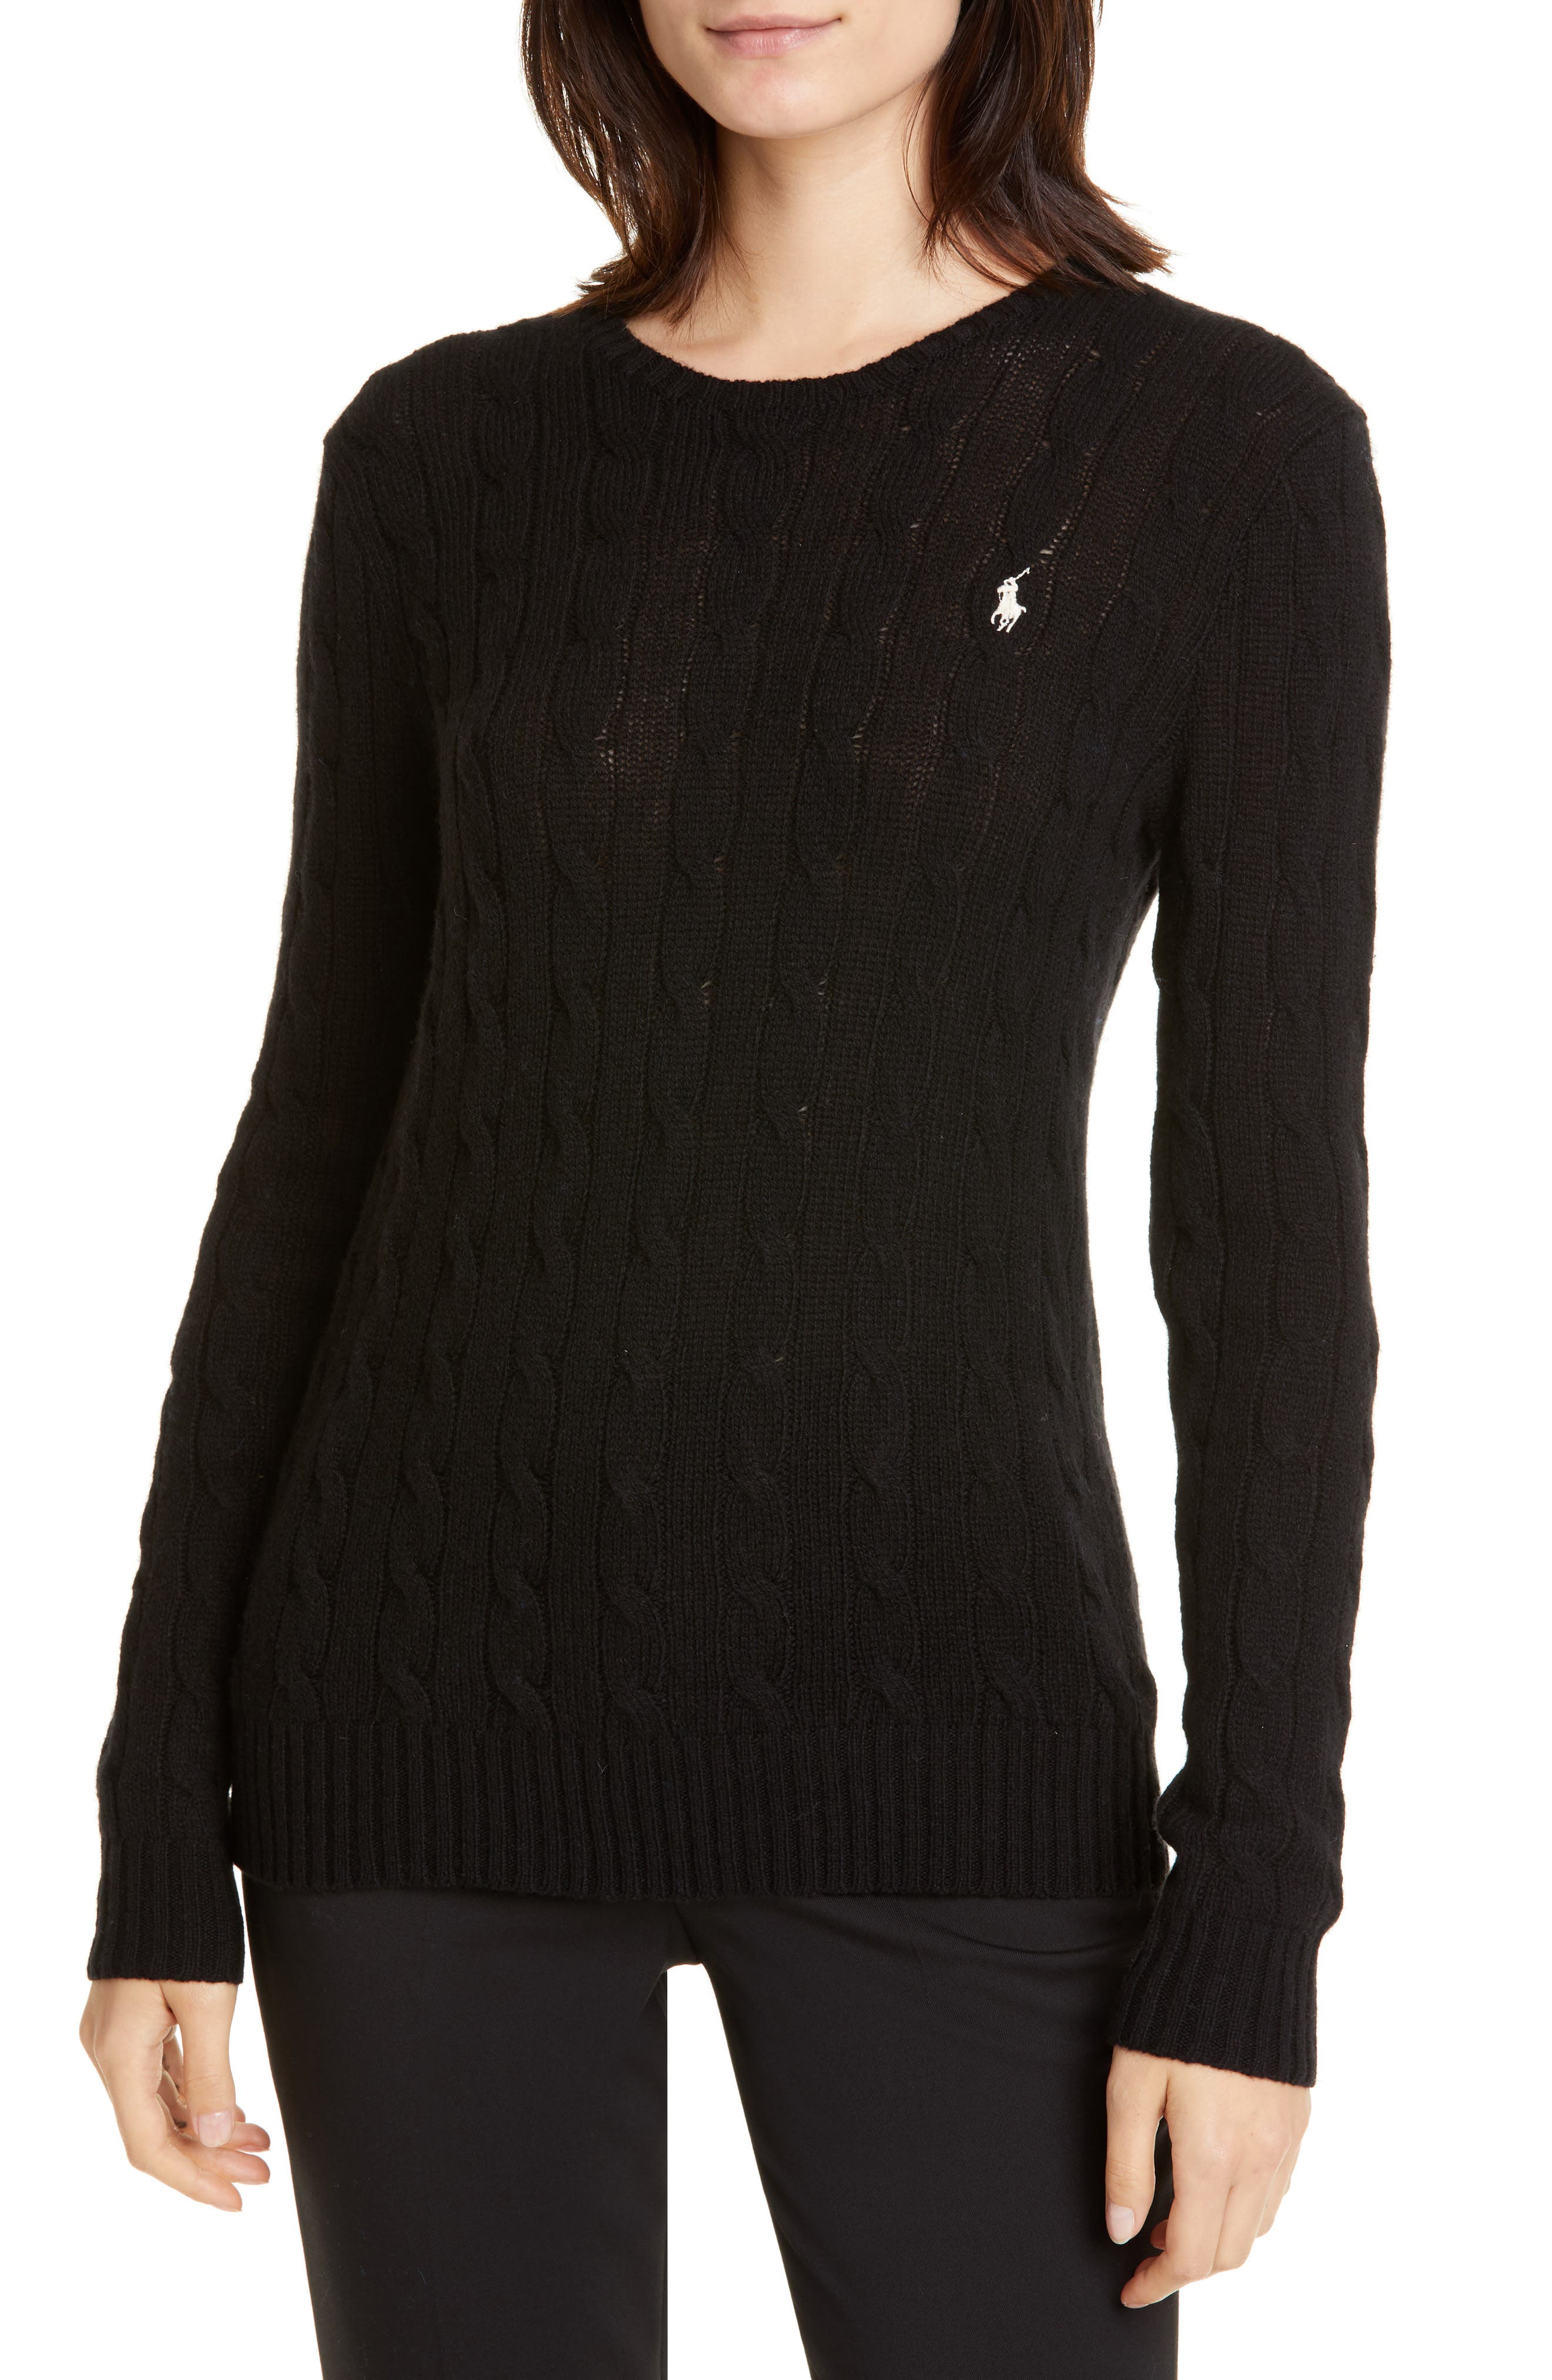 polo cable knit sweater womens